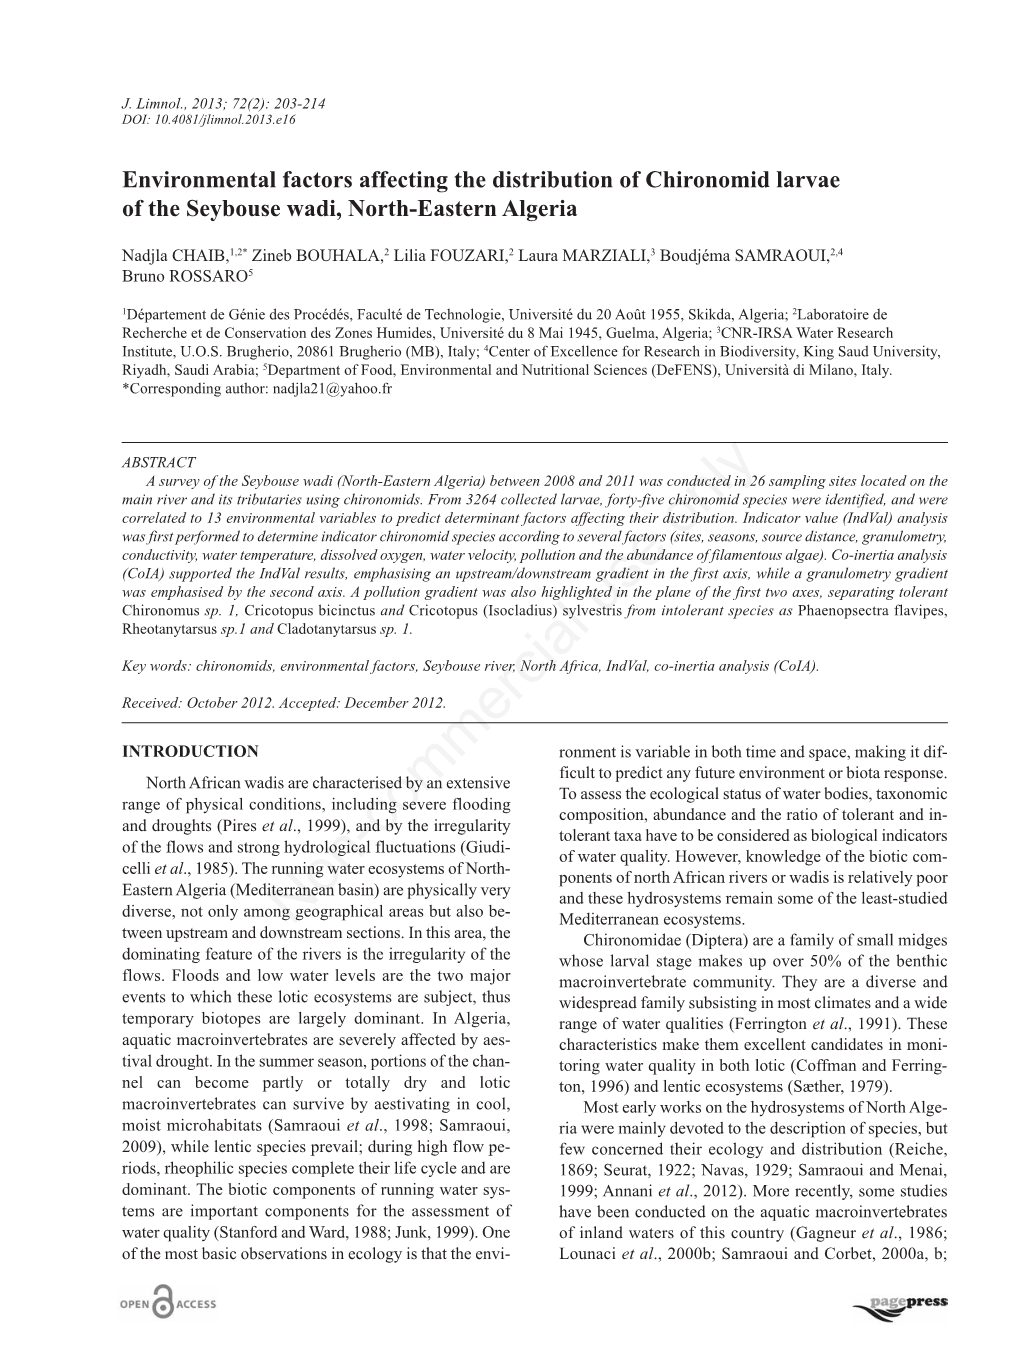 Environmental Factors Affecting the Distribution of Chironomid Larvae of the Seybouse Wadi, North-Eastern Algeria